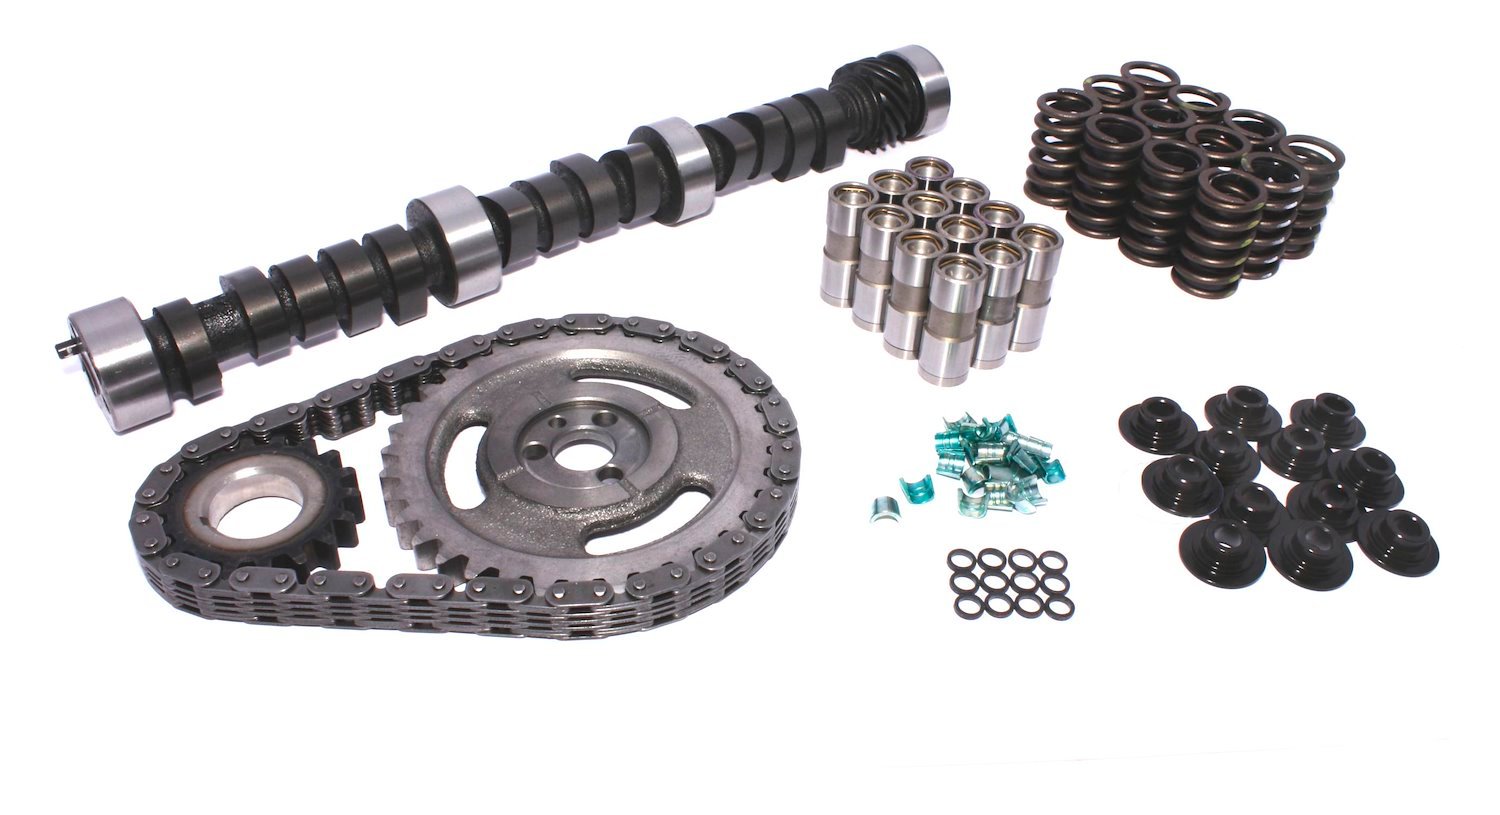 Xtreme Energy 252H Hydraulic Flat Tappet Camshaft Complete Kit Lift: .425"/.425" Duration: 252/252 RPM Range: 800-4800